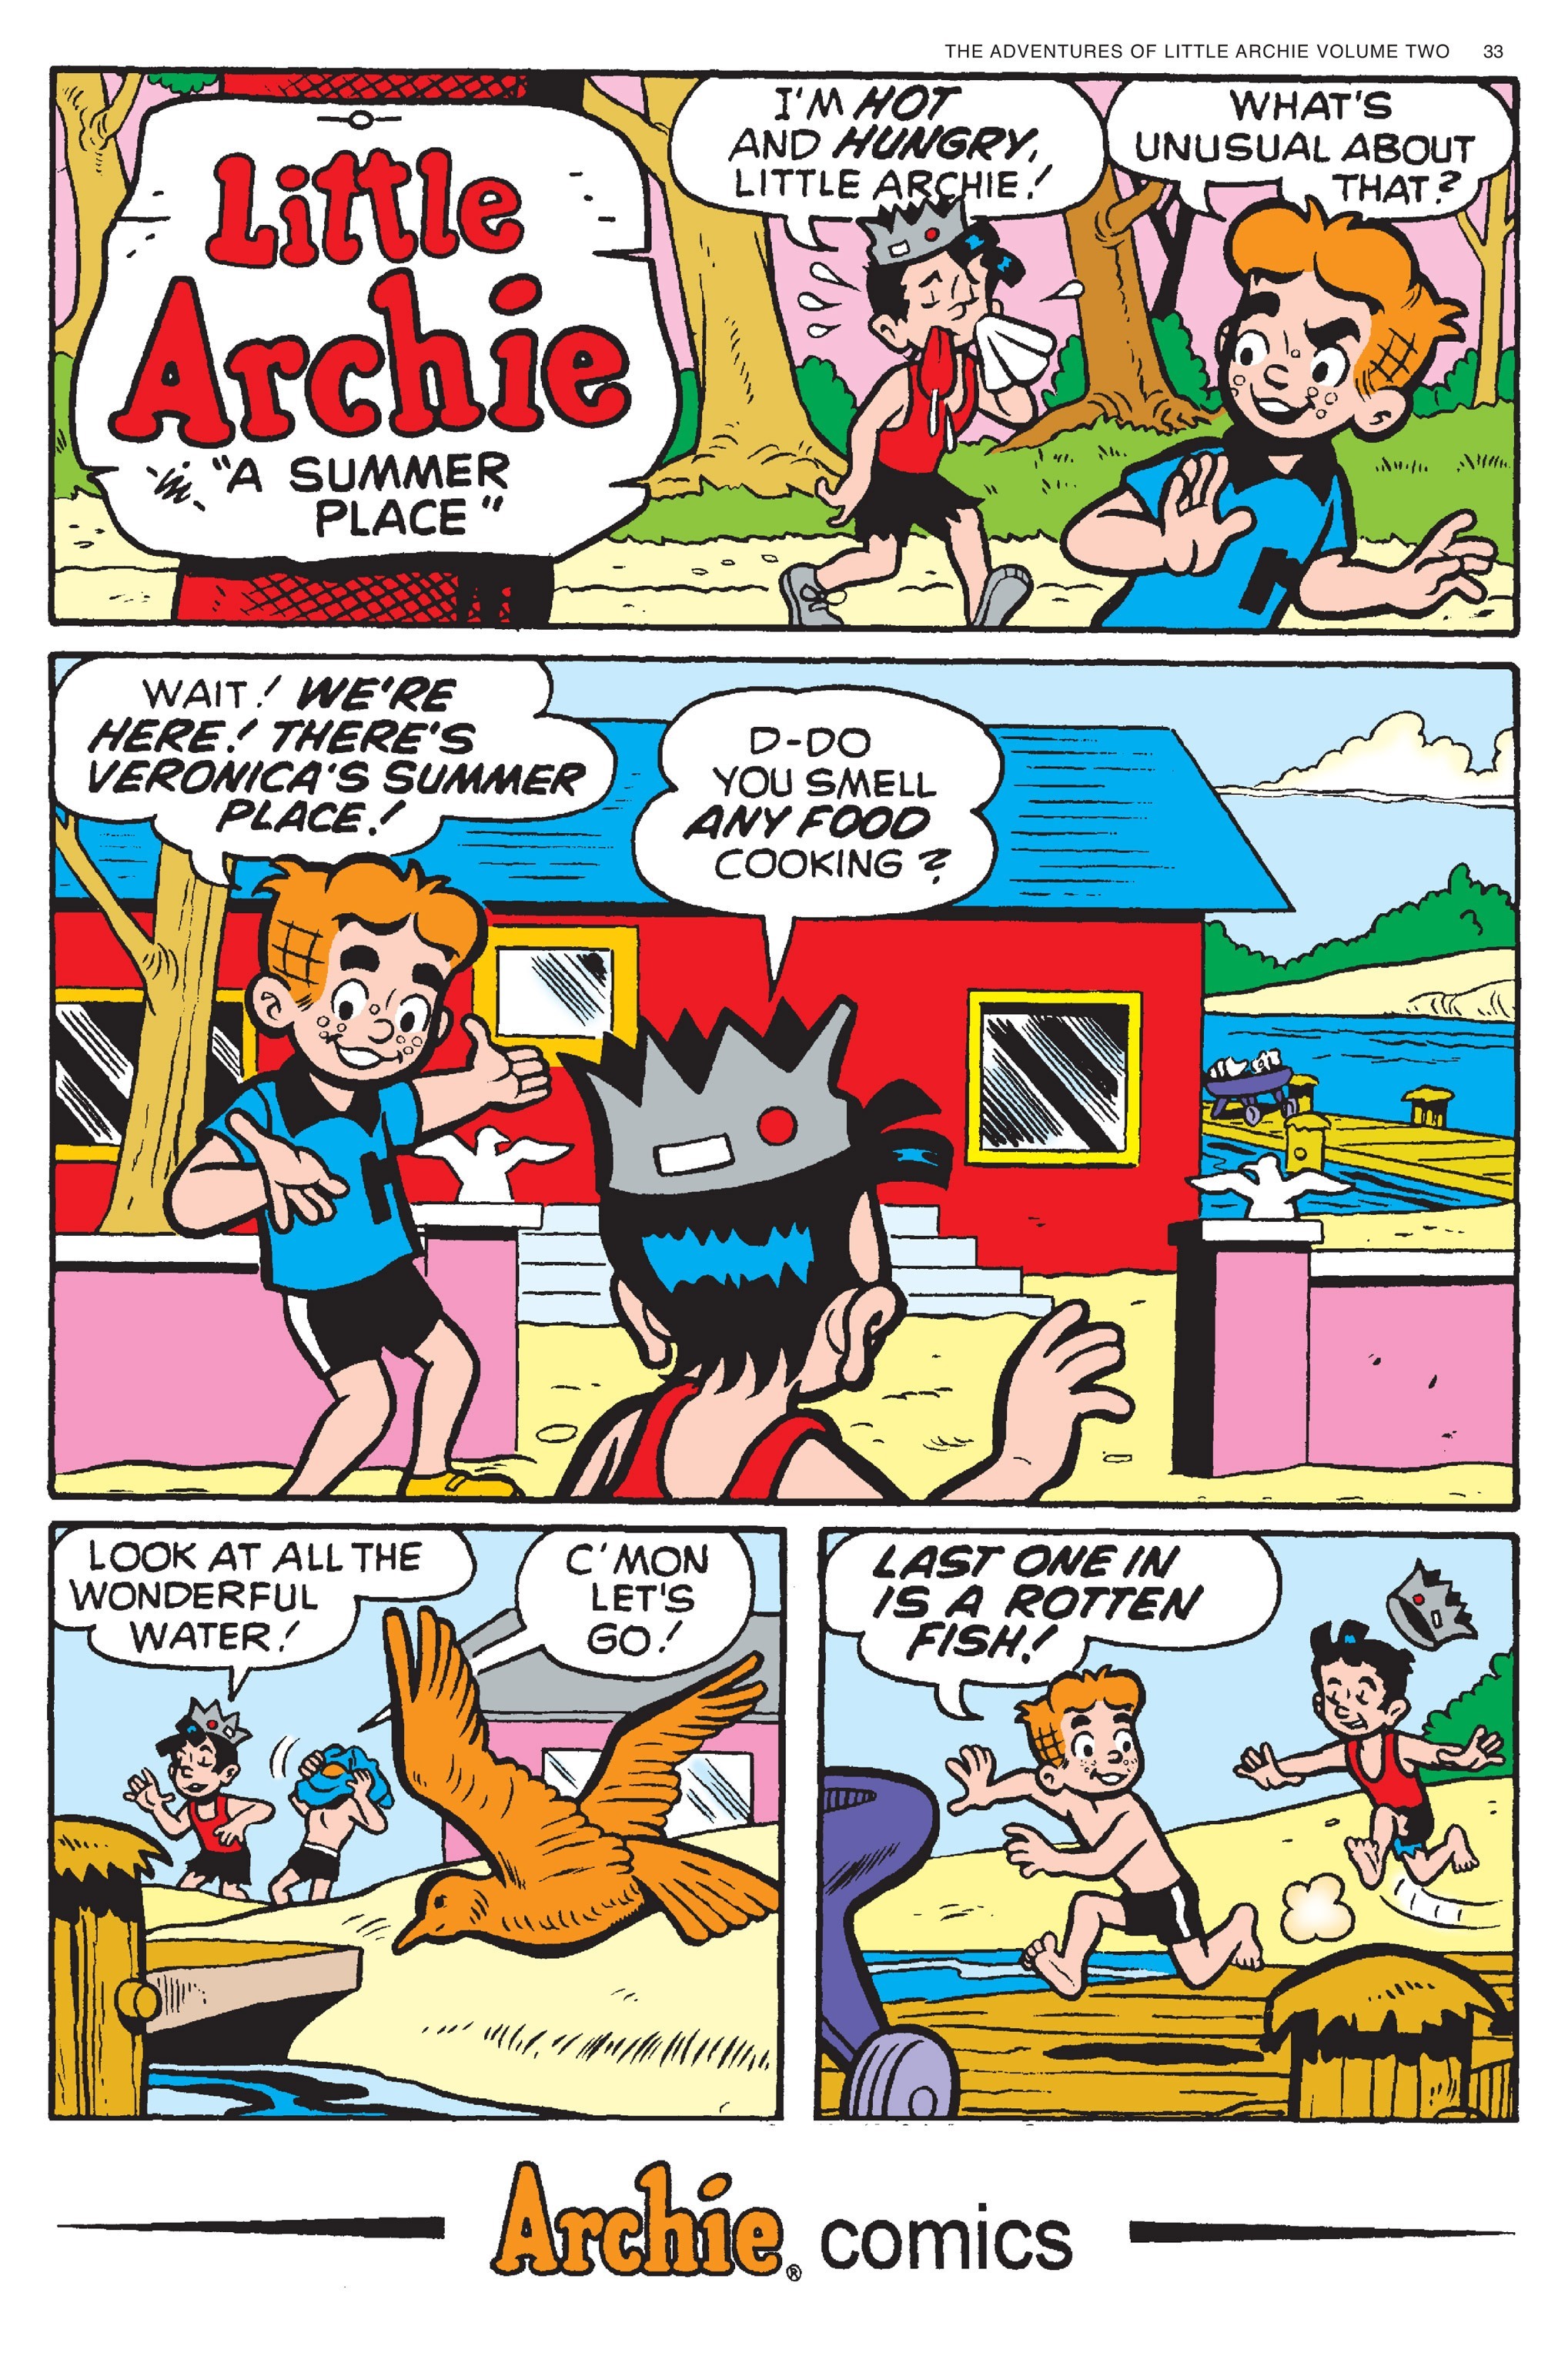 Read online Adventures of Little Archie comic -  Issue # TPB 2 - 34